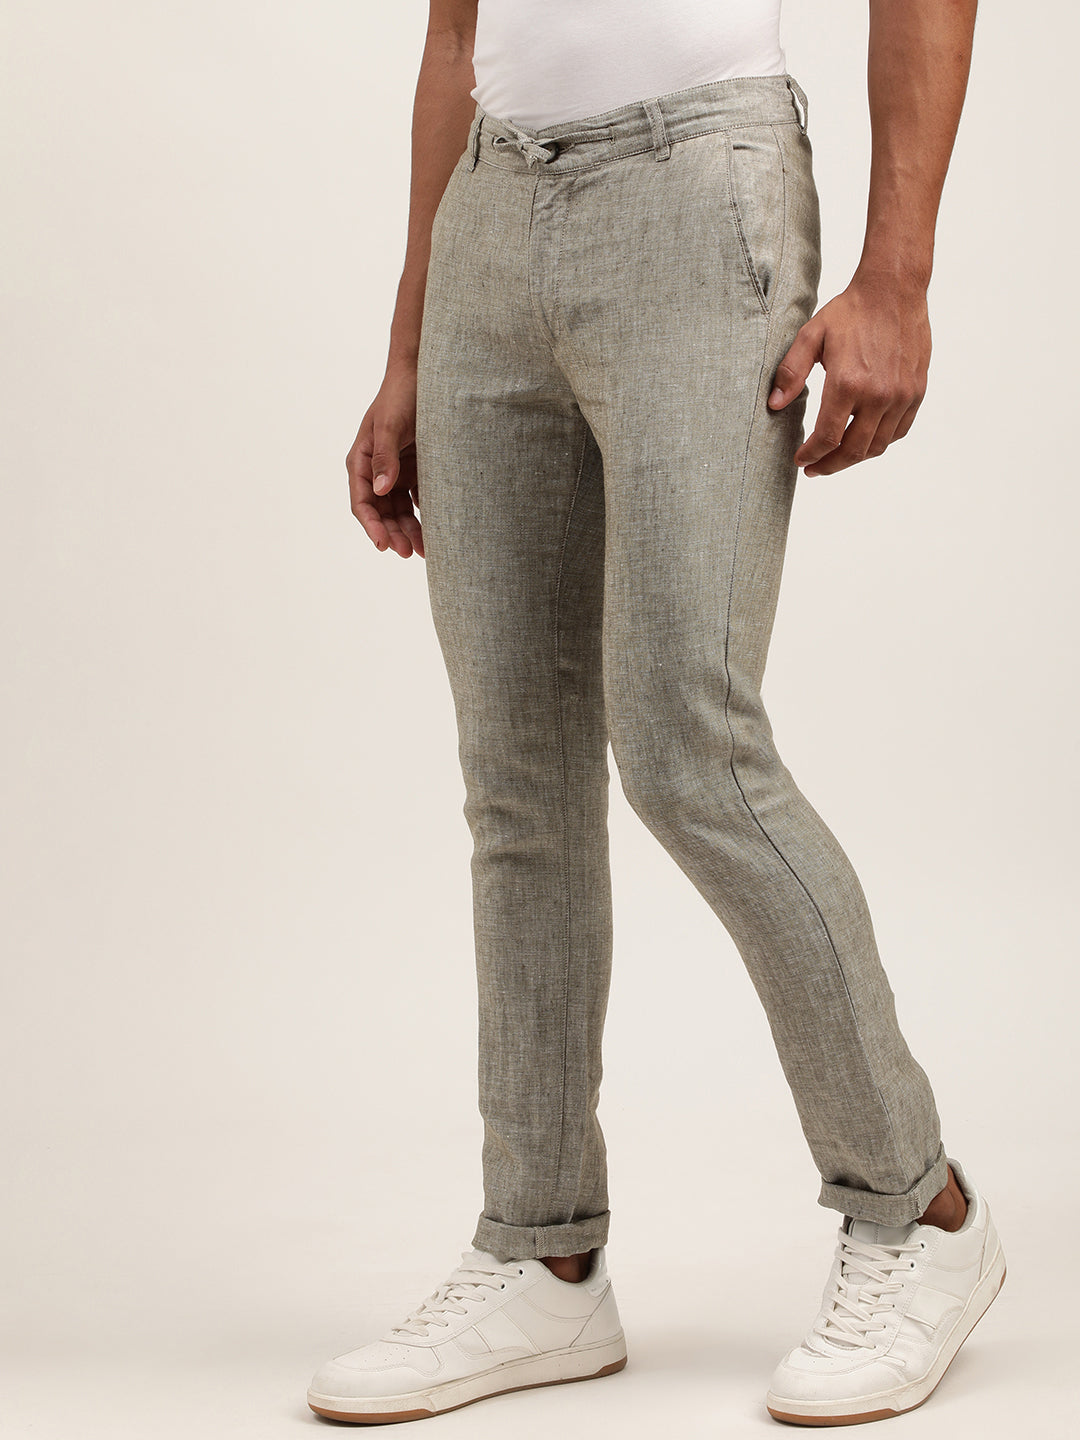 Solid Grey Linen Trouser, Regular Fit at Rs 950 in Bengaluru | ID:  2851926830691